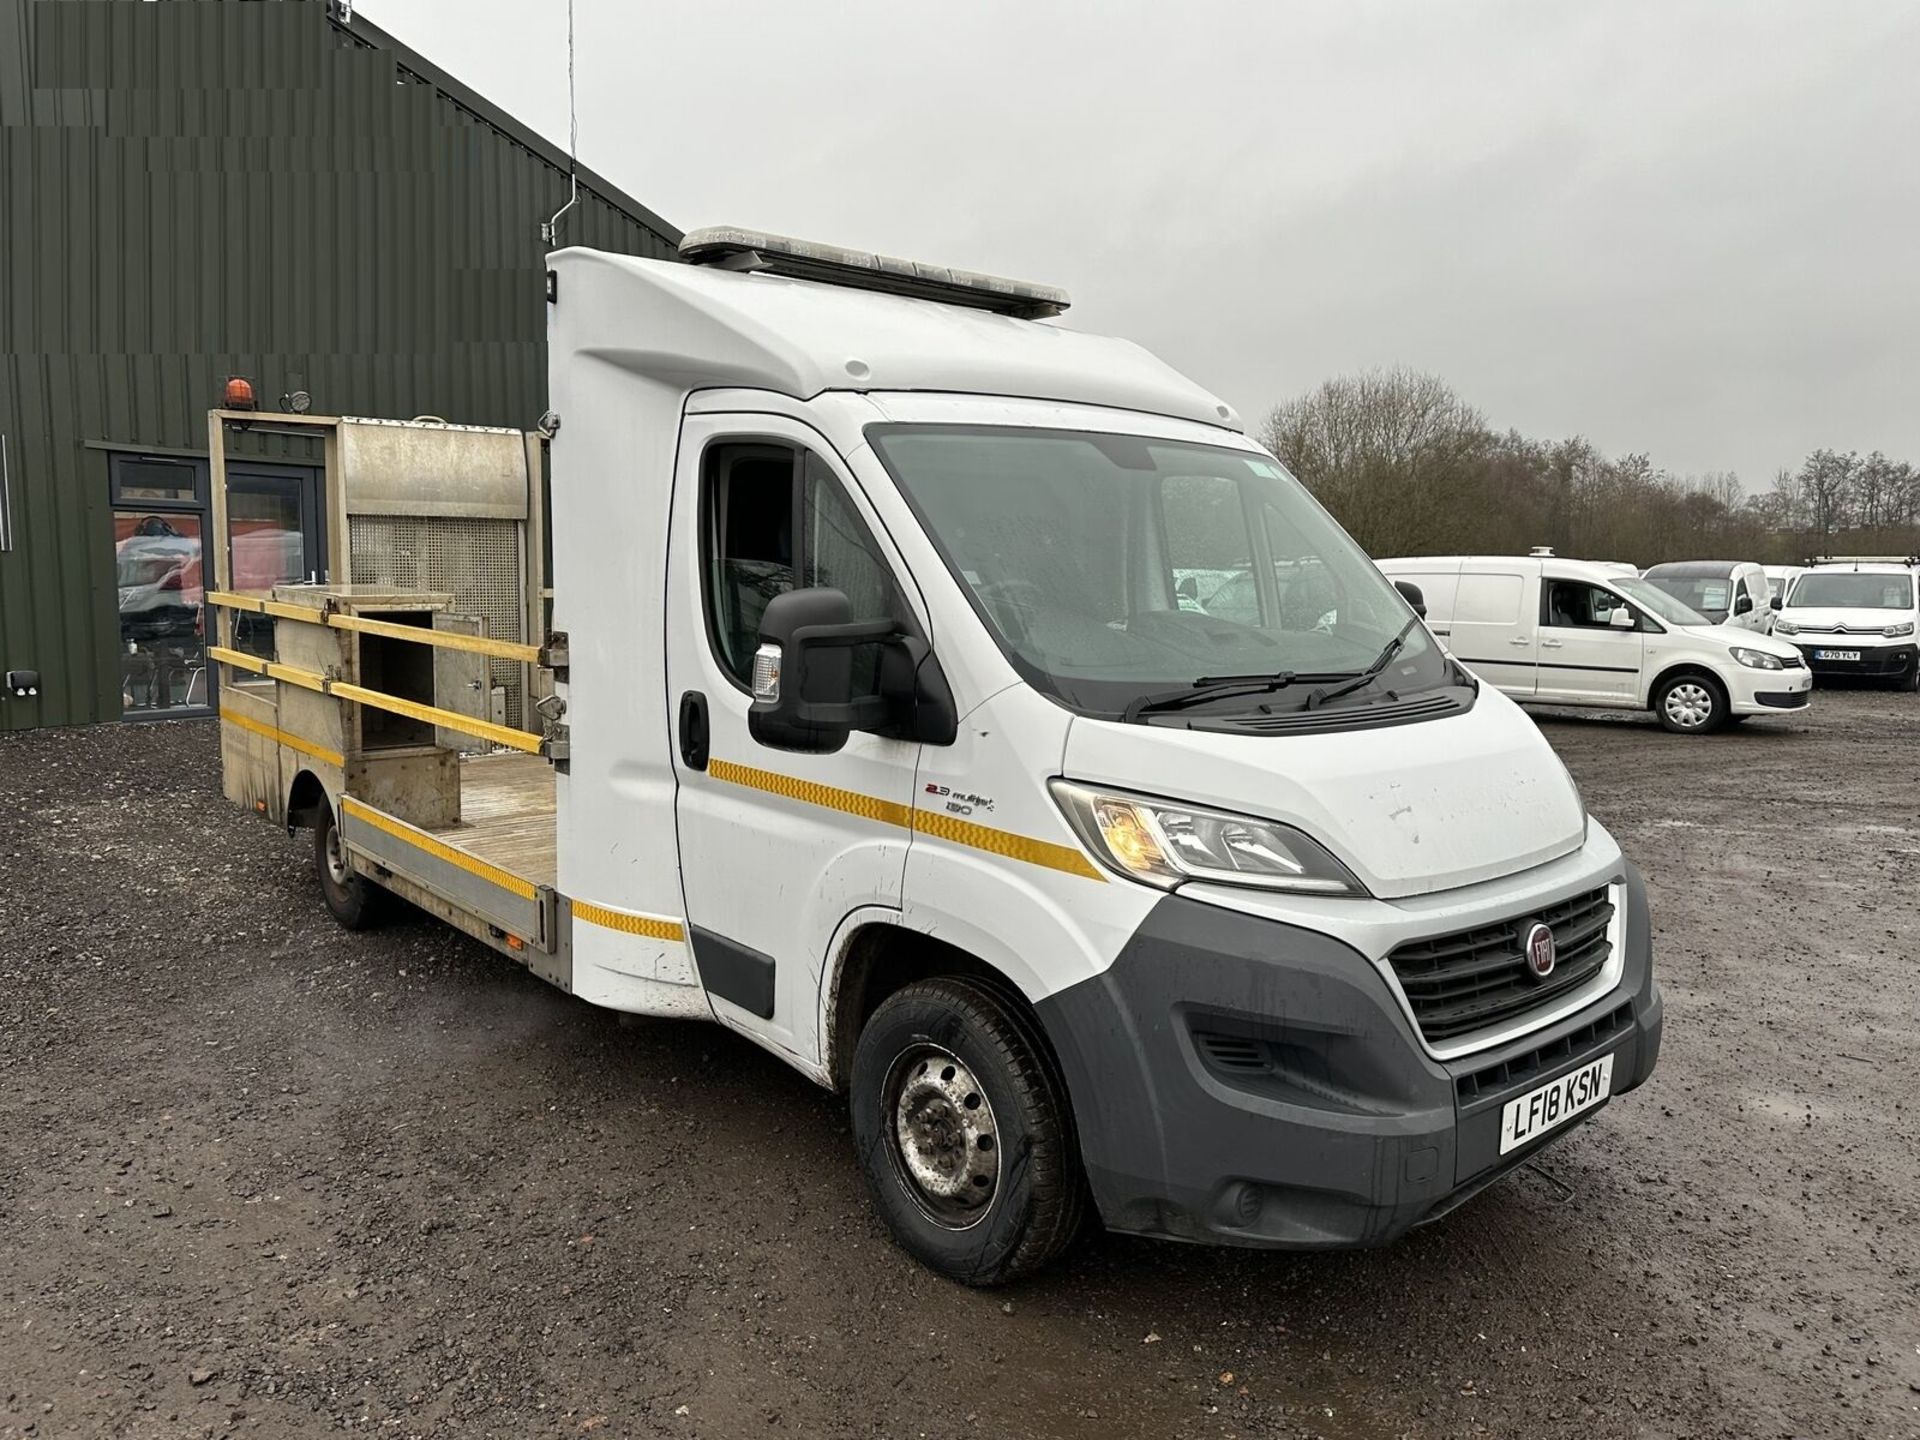 POWERFUL 2018 FIAT DUCATO 35: PERFECT RECOVERY LORRY